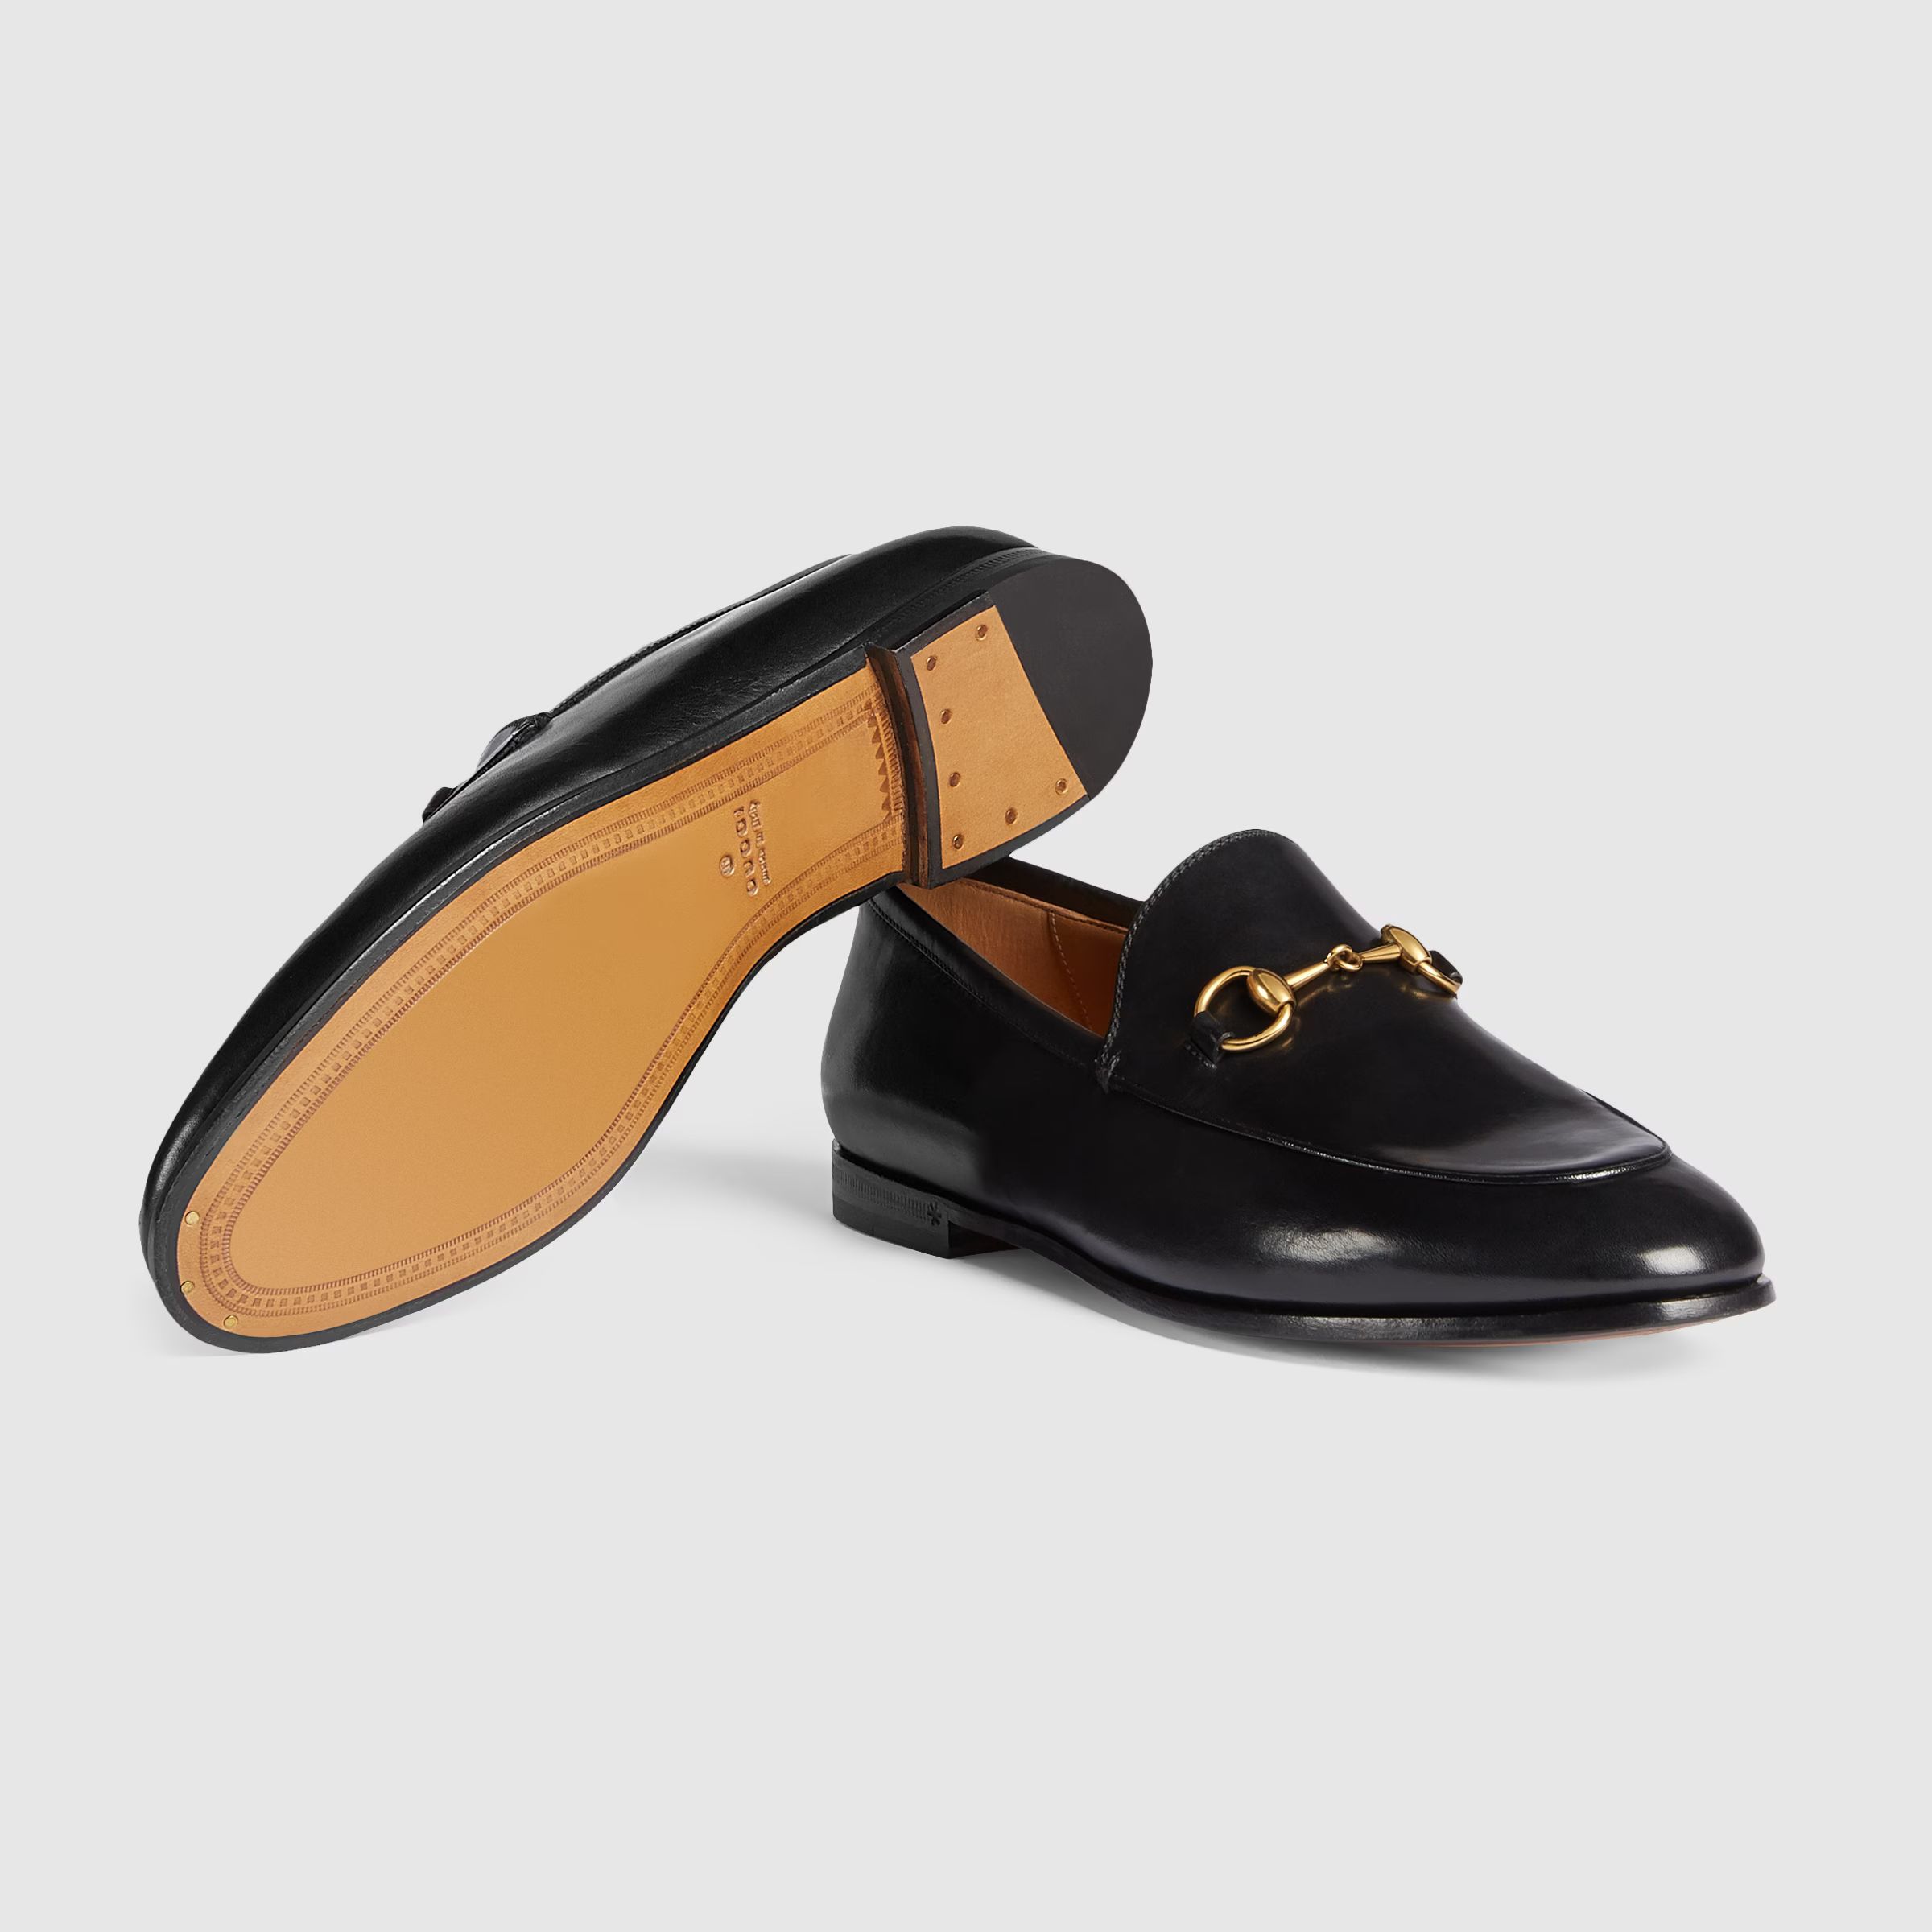 Gucci Jordaan leather loafer | Gucci (US)